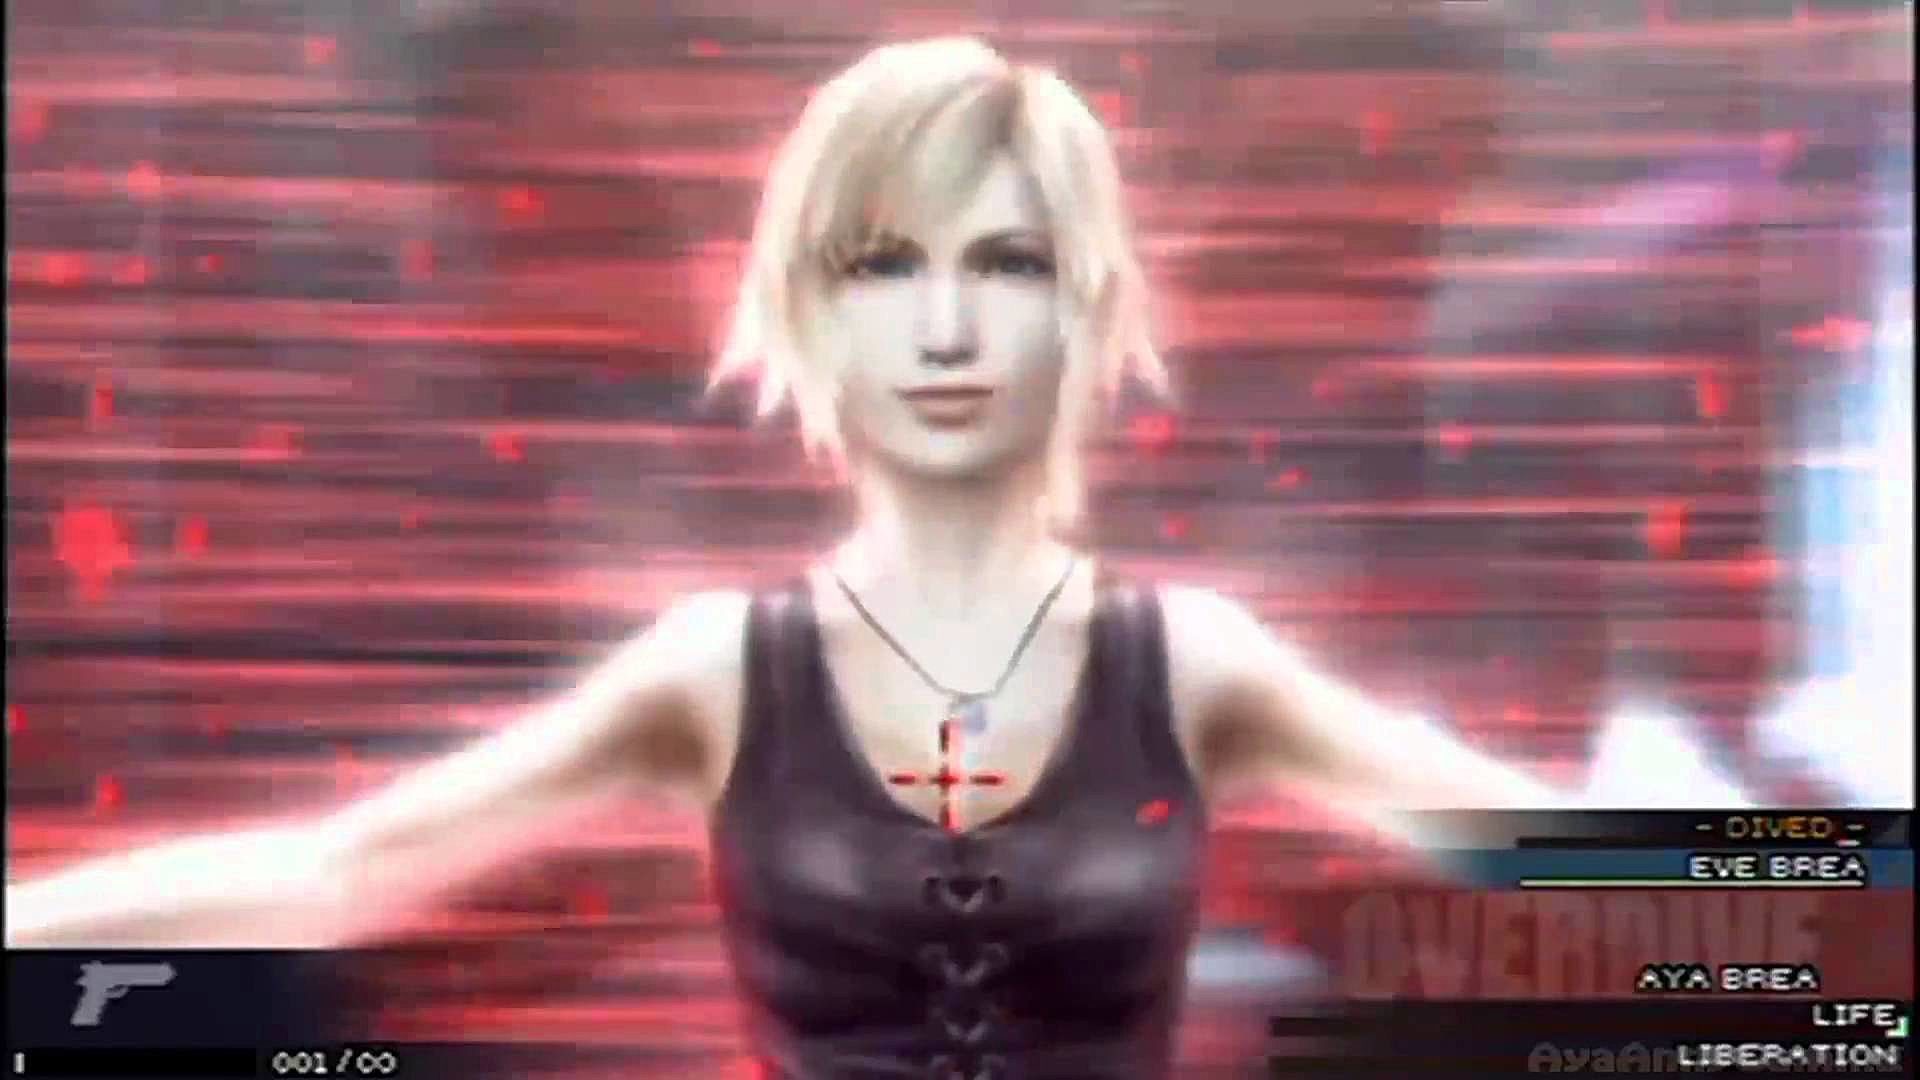 1920x1080 Though if this game did try following continuity, she should technically be  20 since The Third Birthday takes place ten years after Parasite Eve 2.